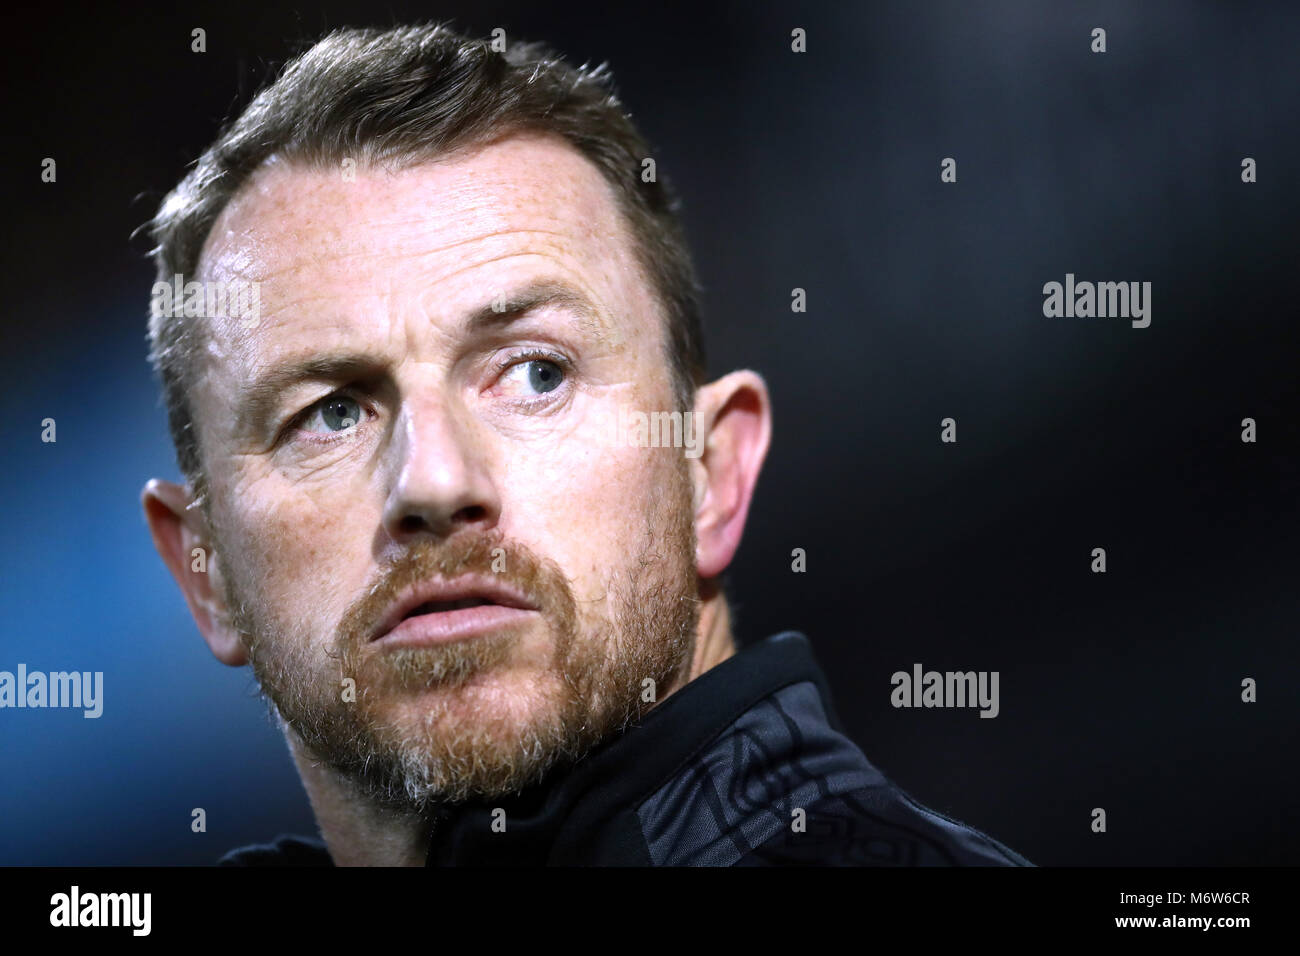 Derby County manager Gary Rowett during the Sky Bet Championship match at Loftus Road, London. PRESS ASSOCIATION Photo. Picture date: Tuesday March 6, 2018. See PA story SOCCER QPR. Photo credit should read: Tim Goode/PA Wire. RESTRICTIONS: No use with unauthorised audio, video, data, fixture lists, club/league logos or 'live' services. Online in-match use limited to 75 images, no video emulation. No use in betting, games or single club/league/player publications. Stock Photo